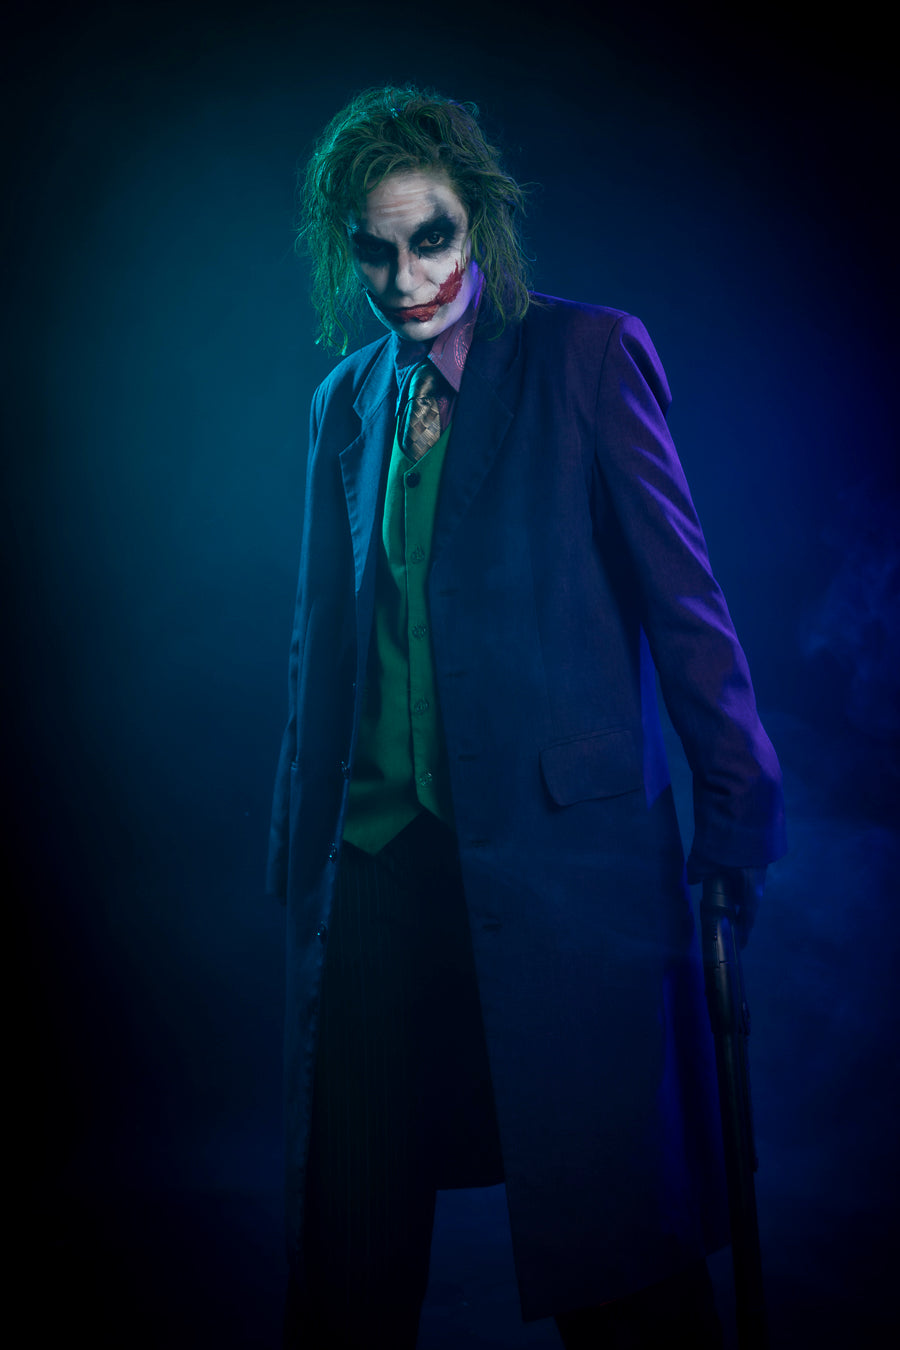 Heath Ledger Joker Costume Hire or Cosplay, plus Makeup and Photography. All by and available at Little Shop of Horrors Costumery Mornington